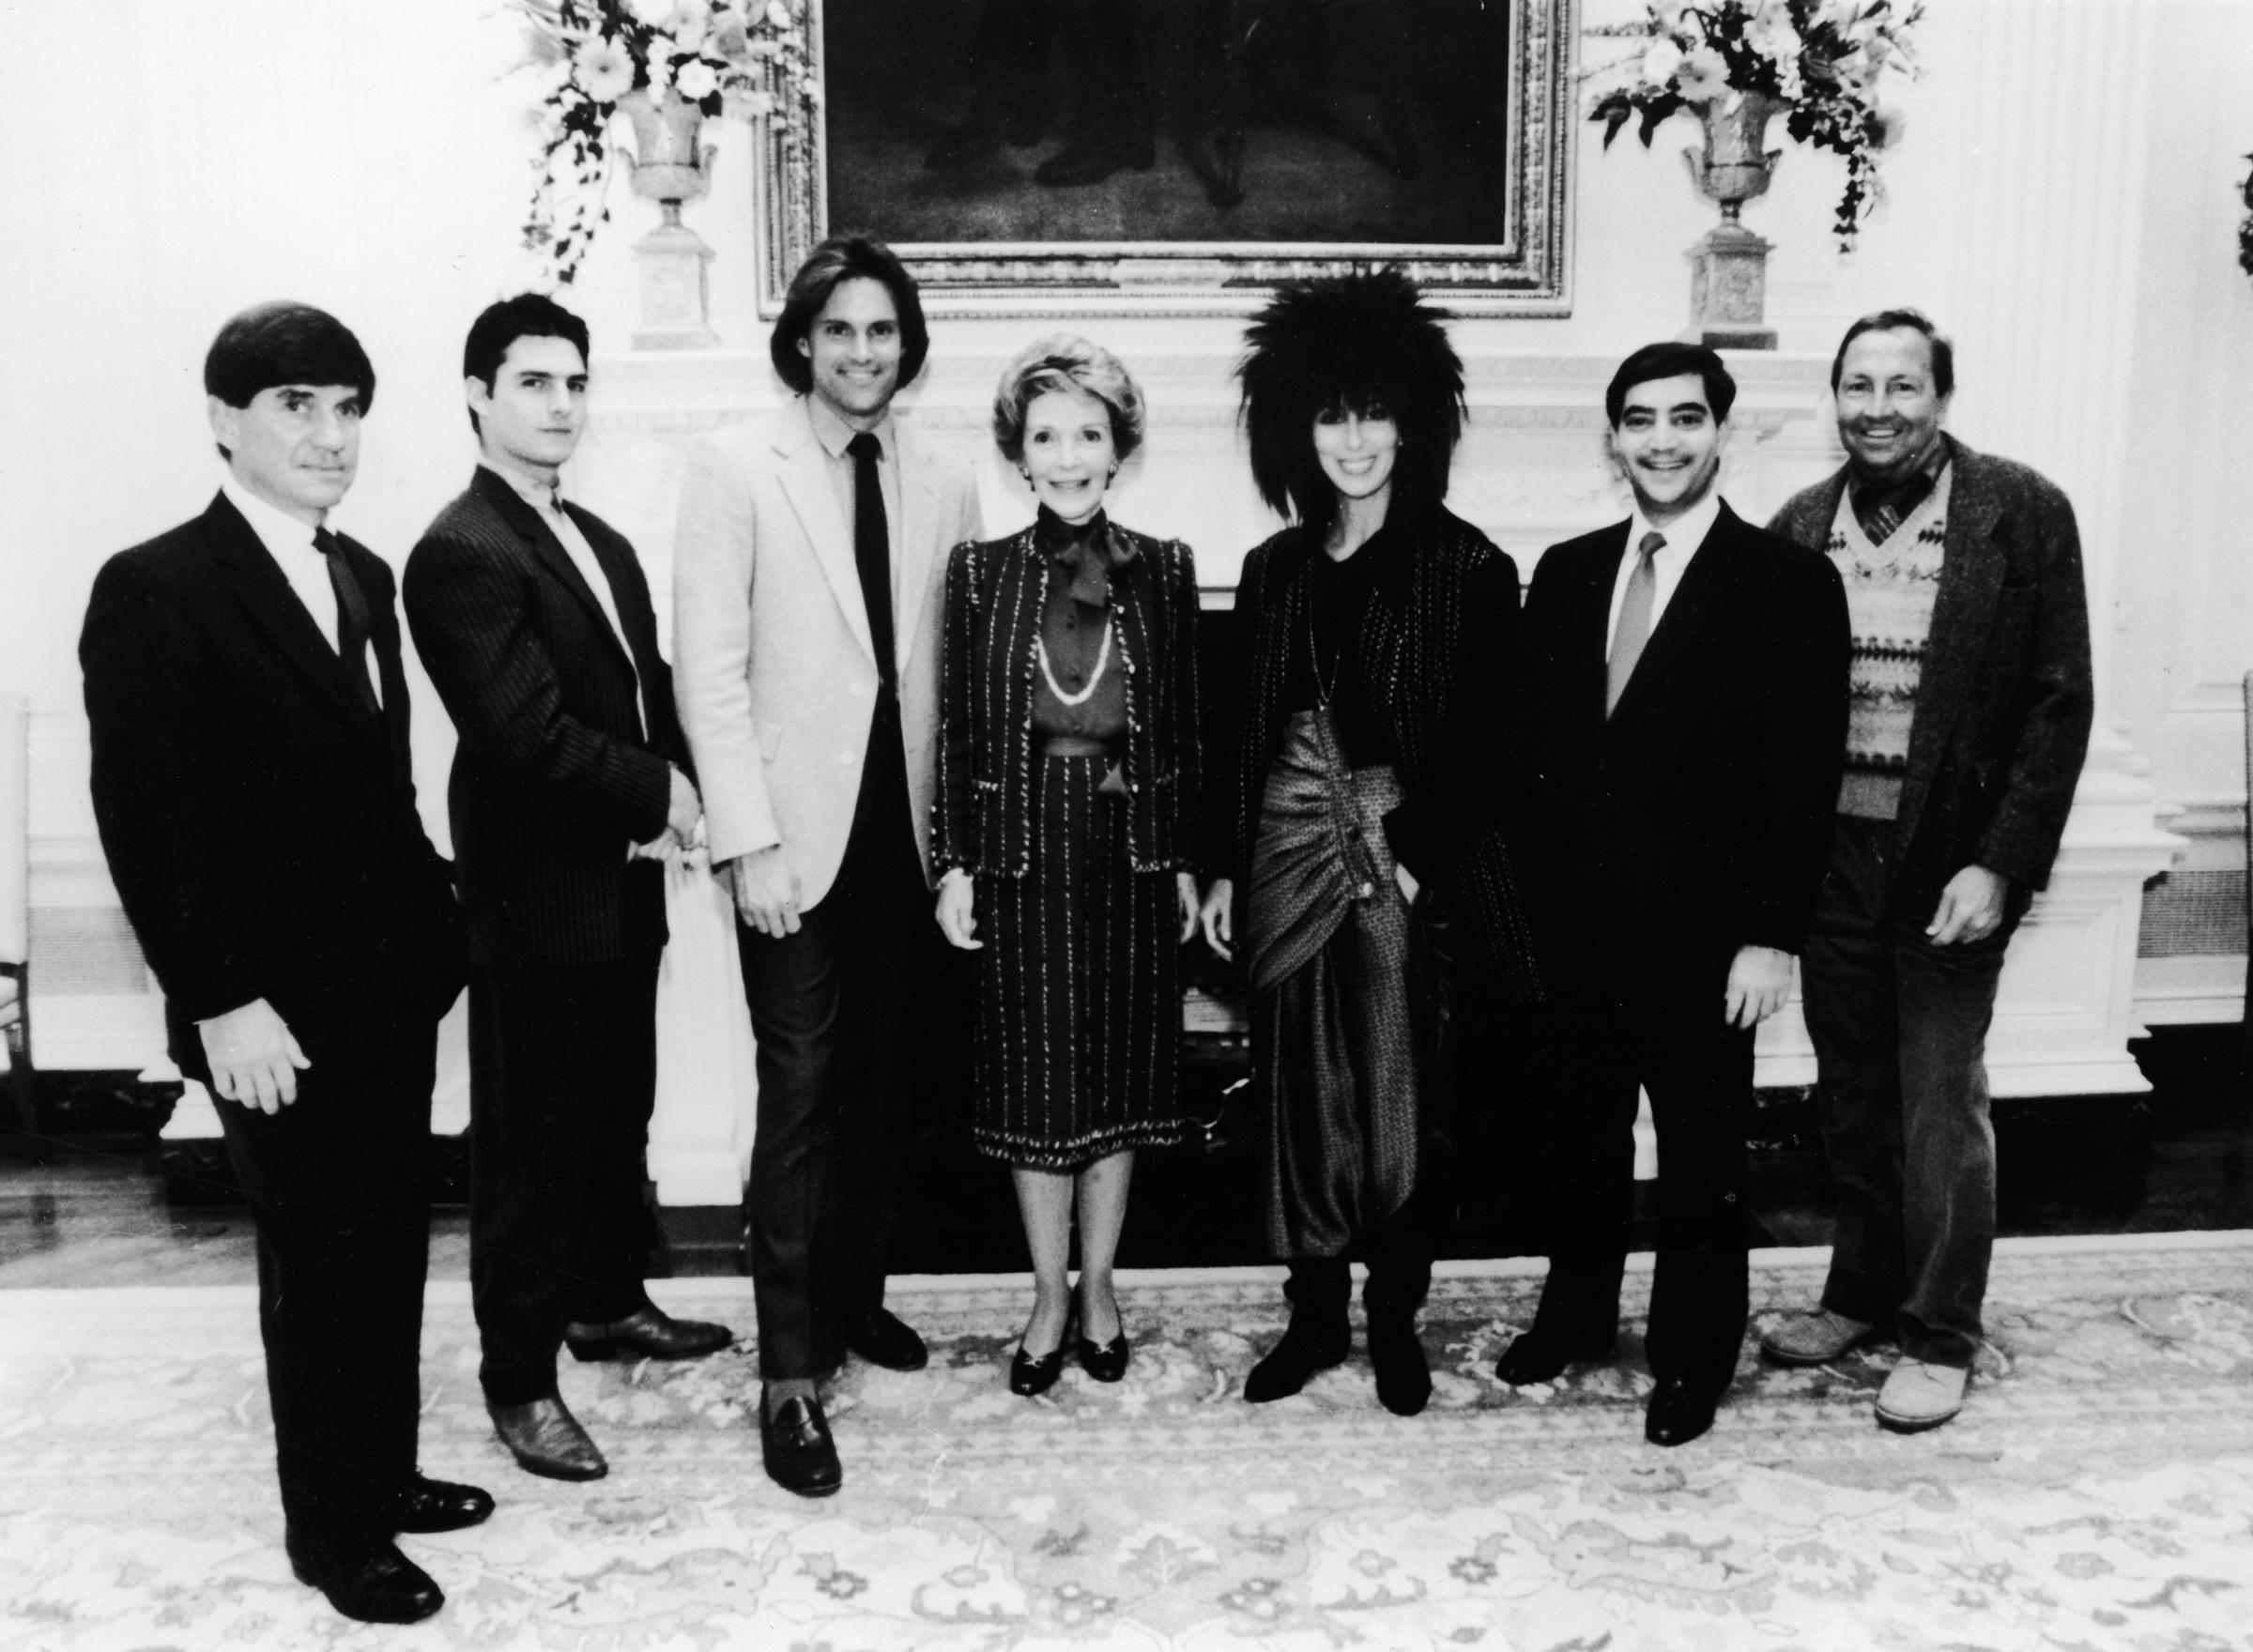 Nancy Reagan poses with celebrity recipients of the Outstanding Learning Disabled Achiever Award, Chris Anderson, Tom Cruise, Caitlyn Jenner, Cher, Richard C. Strauss, and Robert Rauchenberg, at the White House in Washington, D.C. on Oct. 1985.